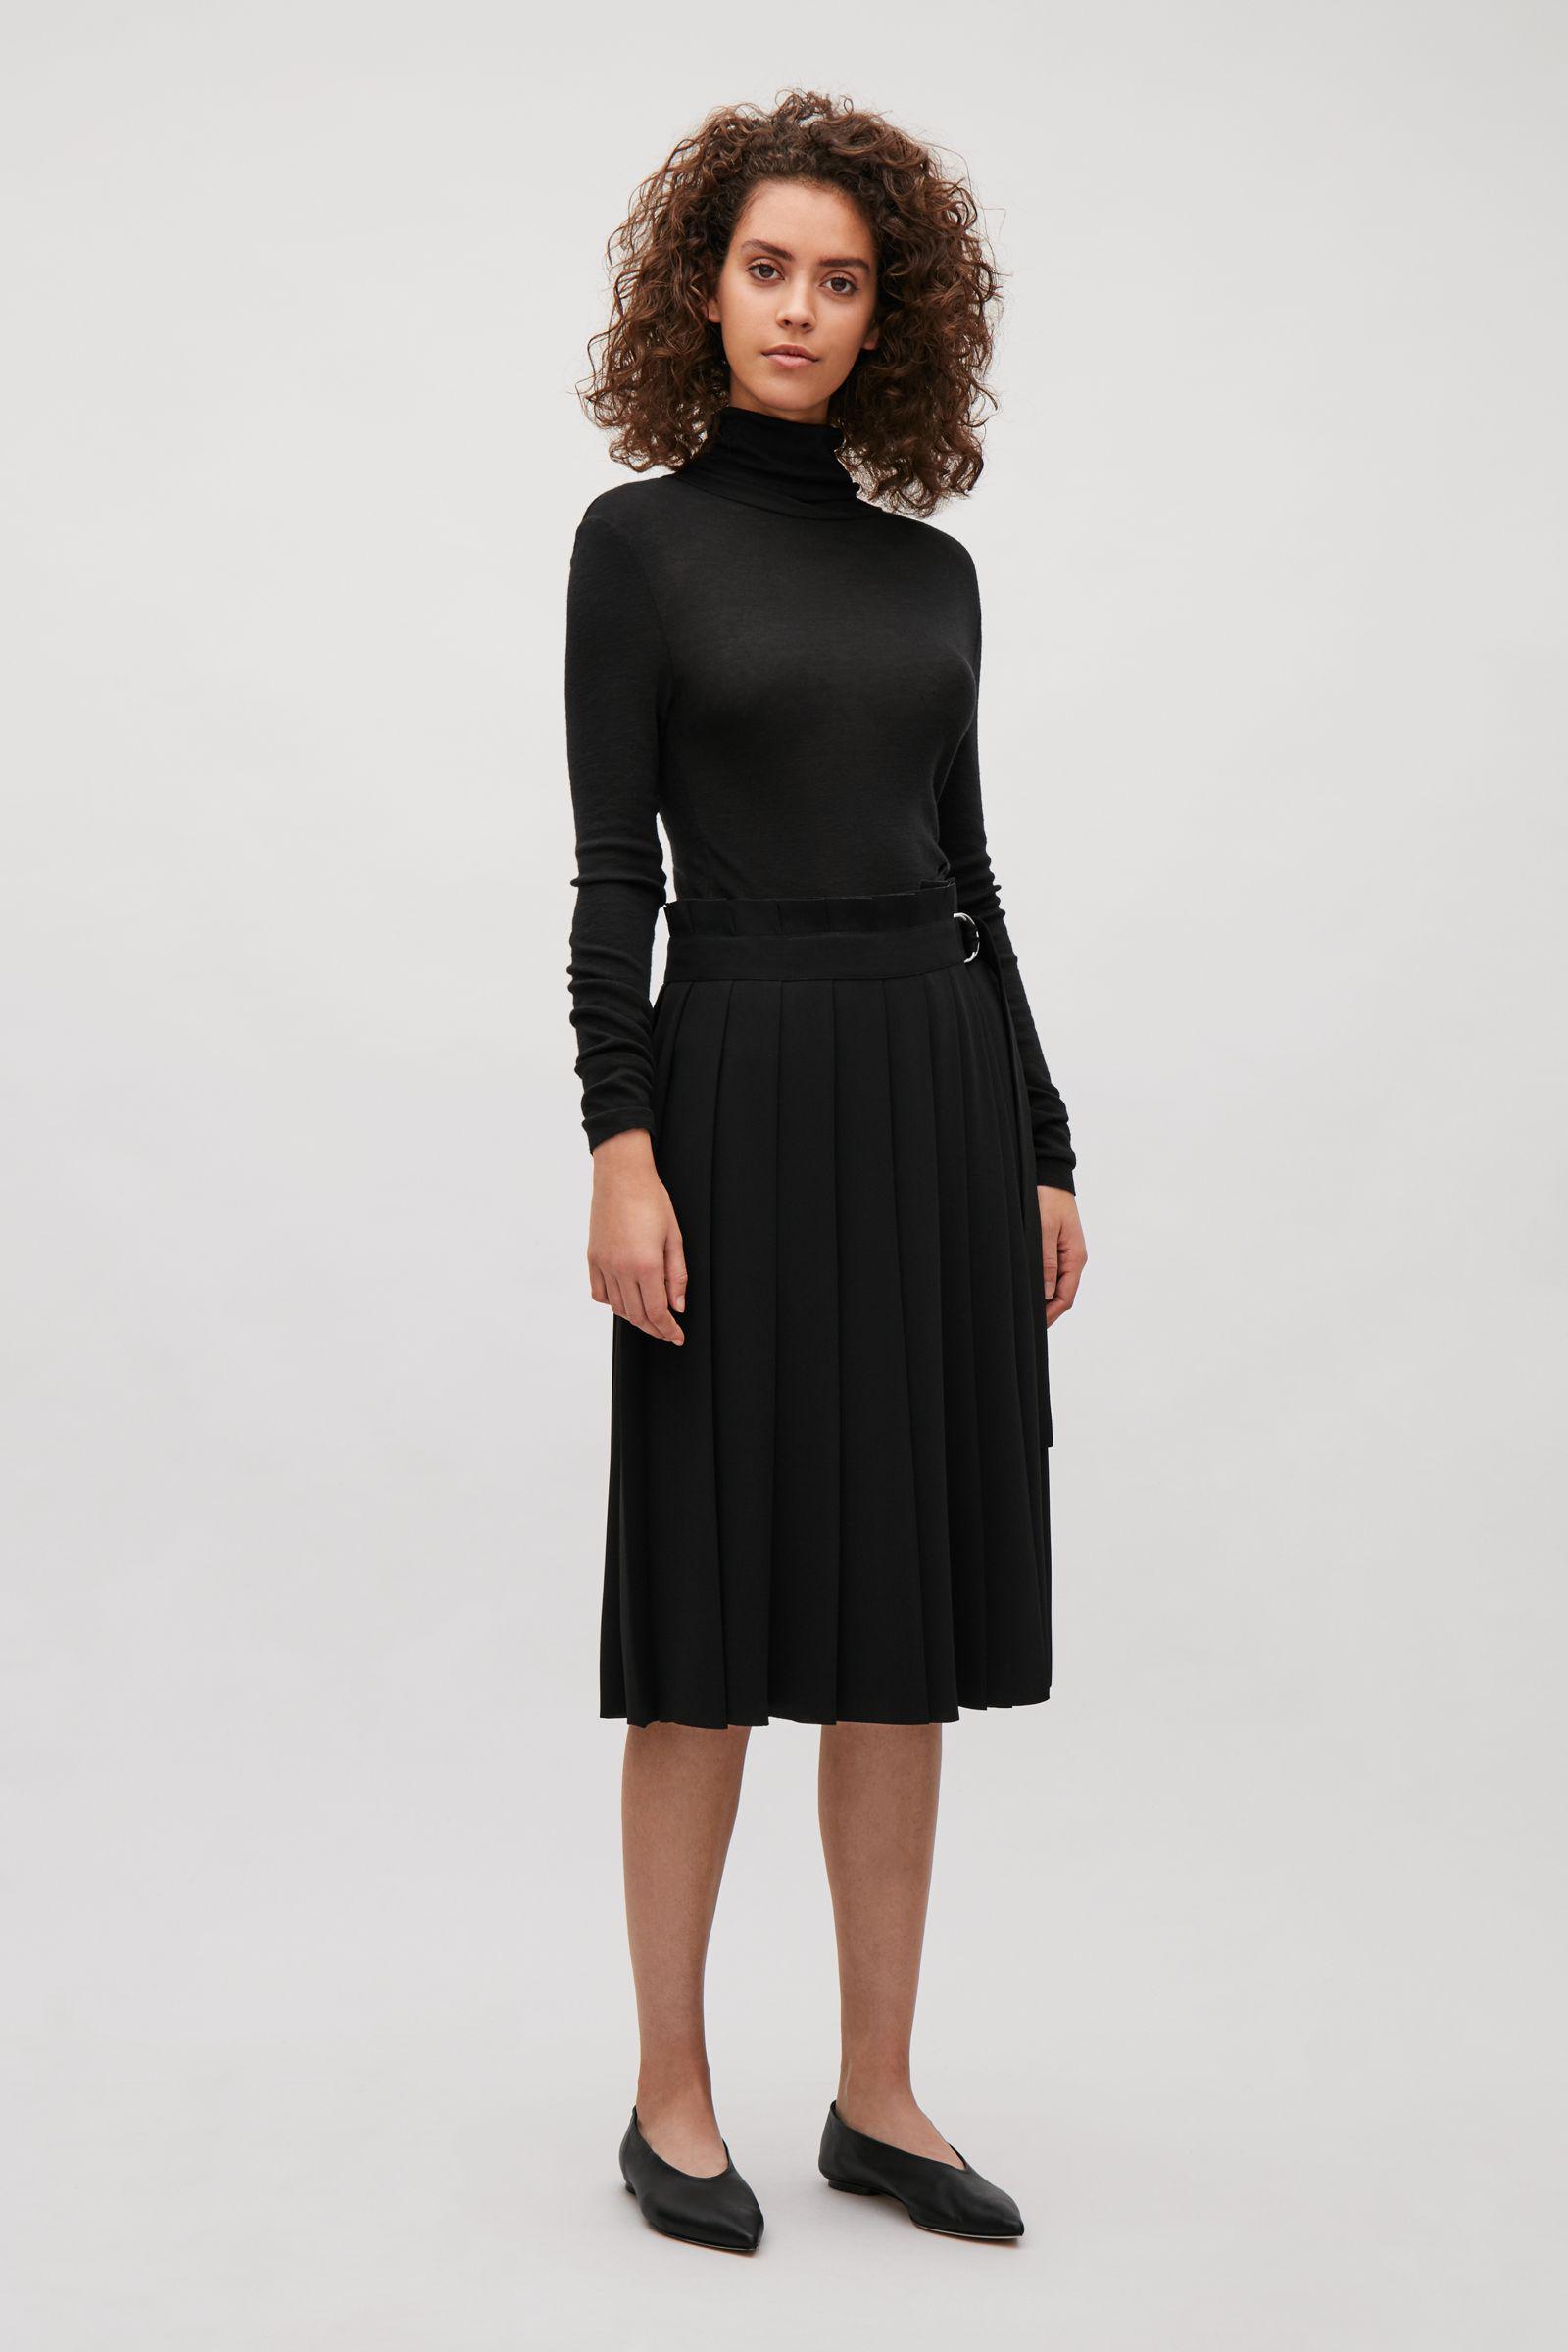 COS Pleated Wrap Skirt in Black | Lyst UK